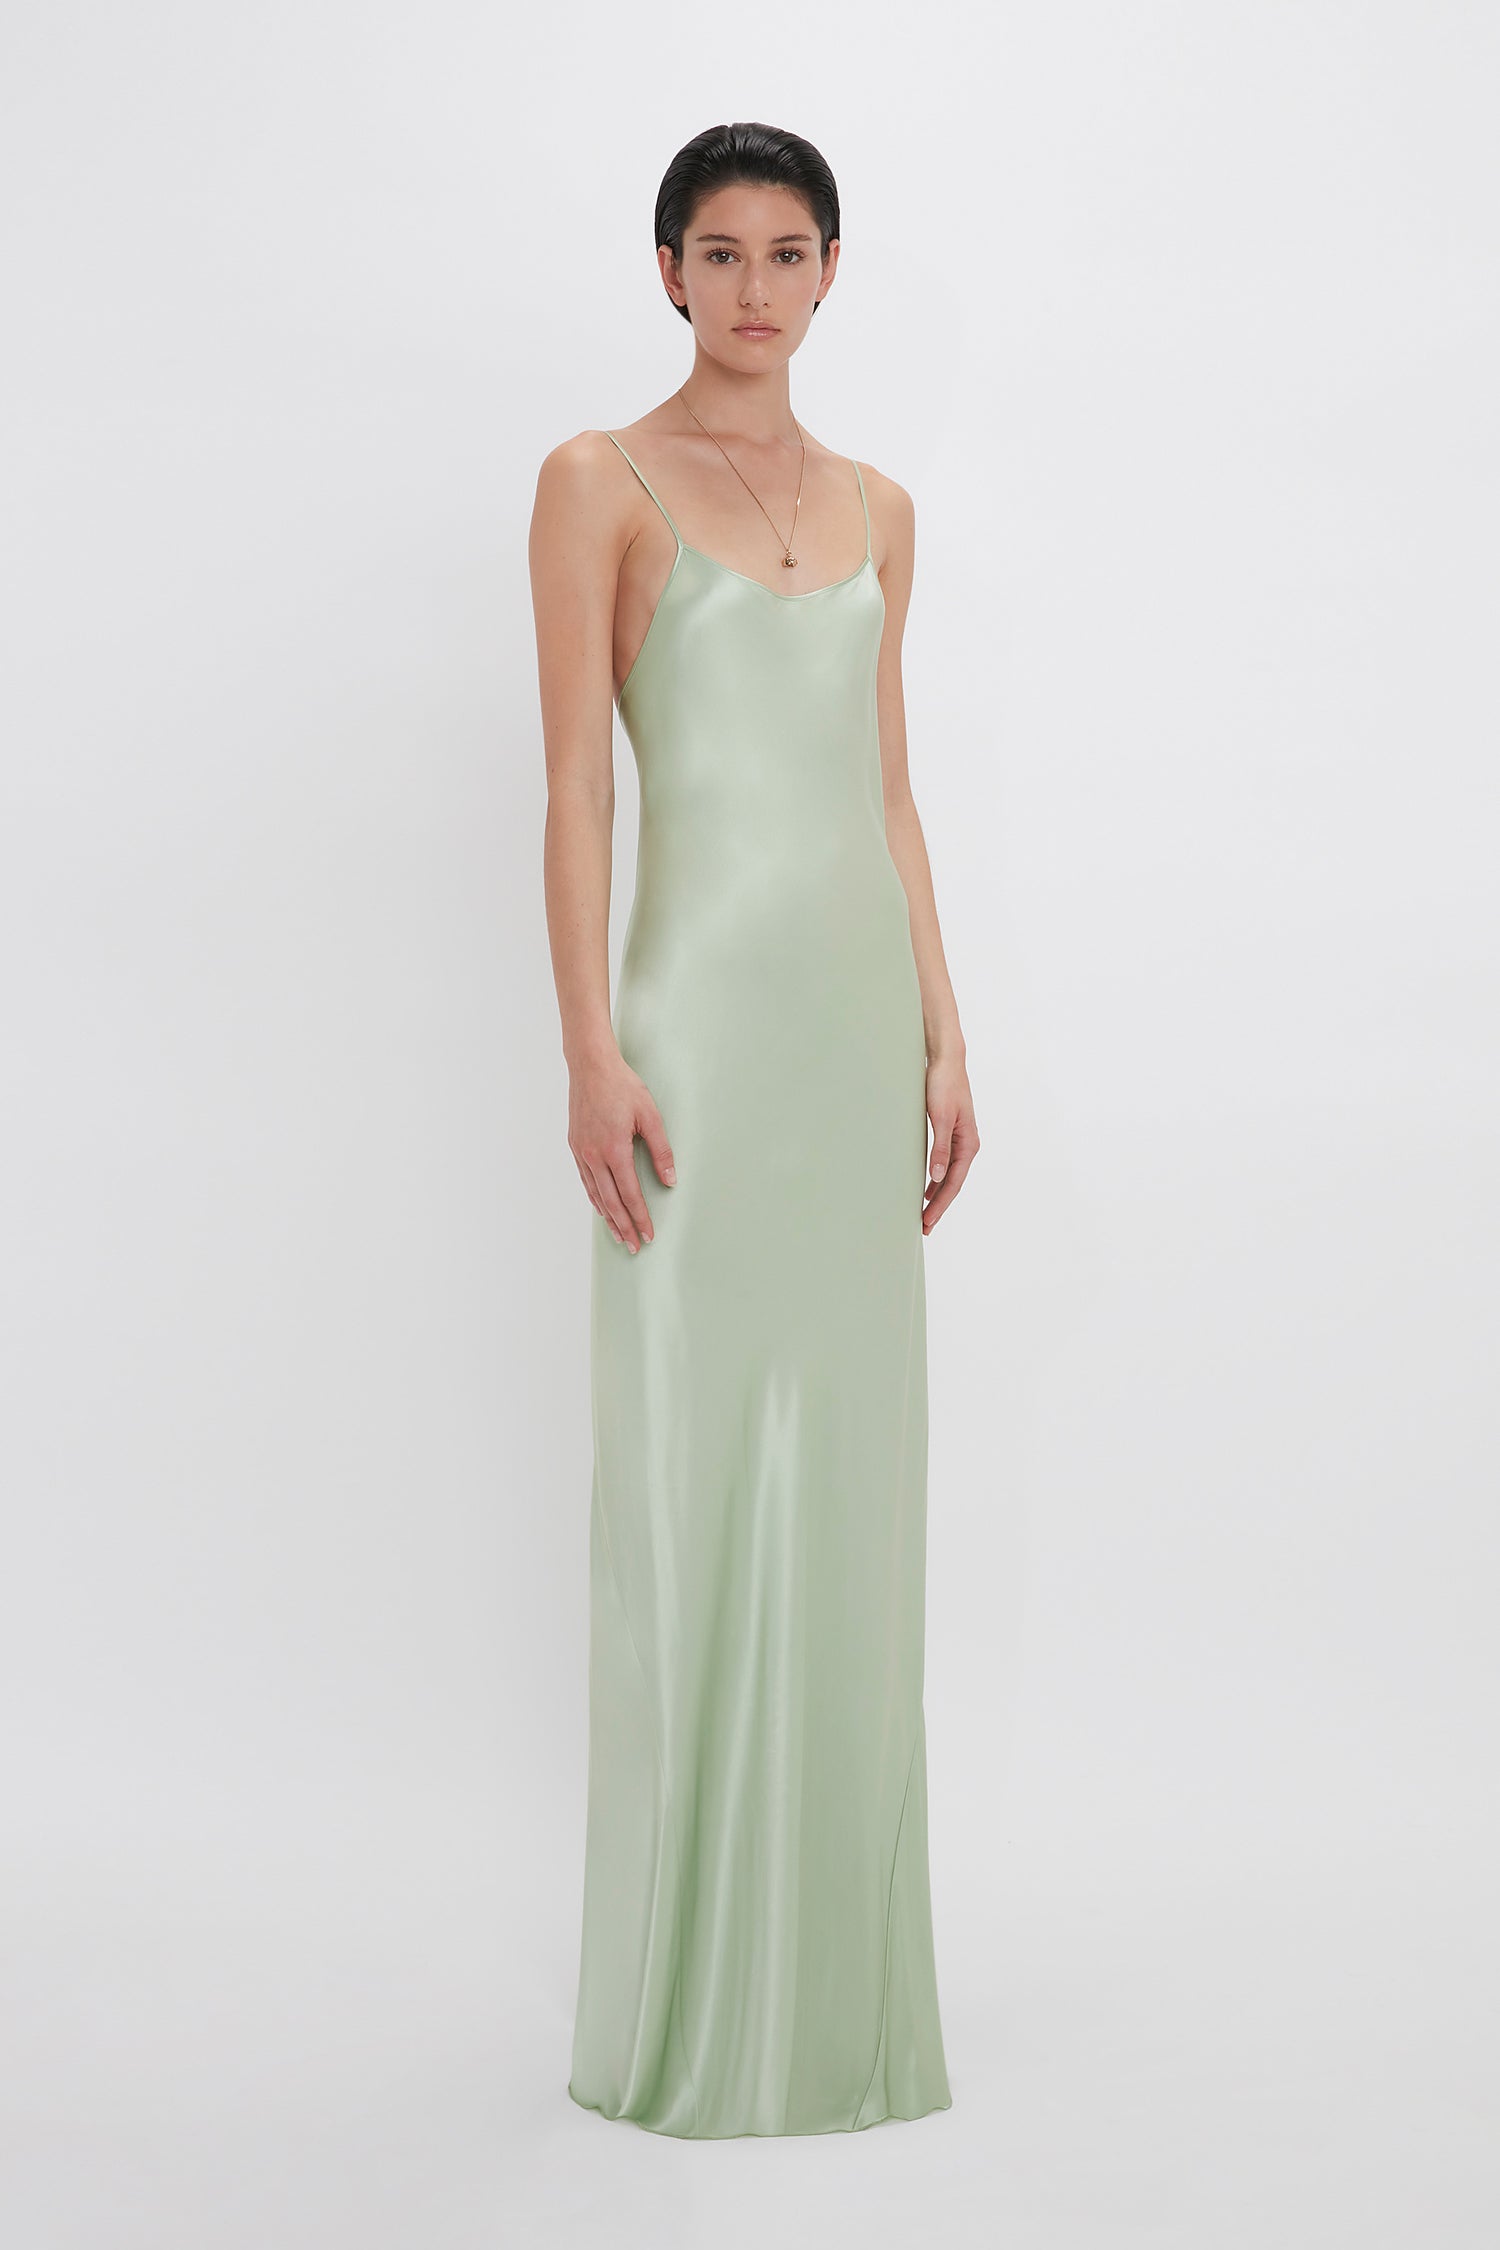 Woman in an Exclusive Low Back Cami Floor-Length Dress In Jade by Victoria Beckham standing against a plain white background.